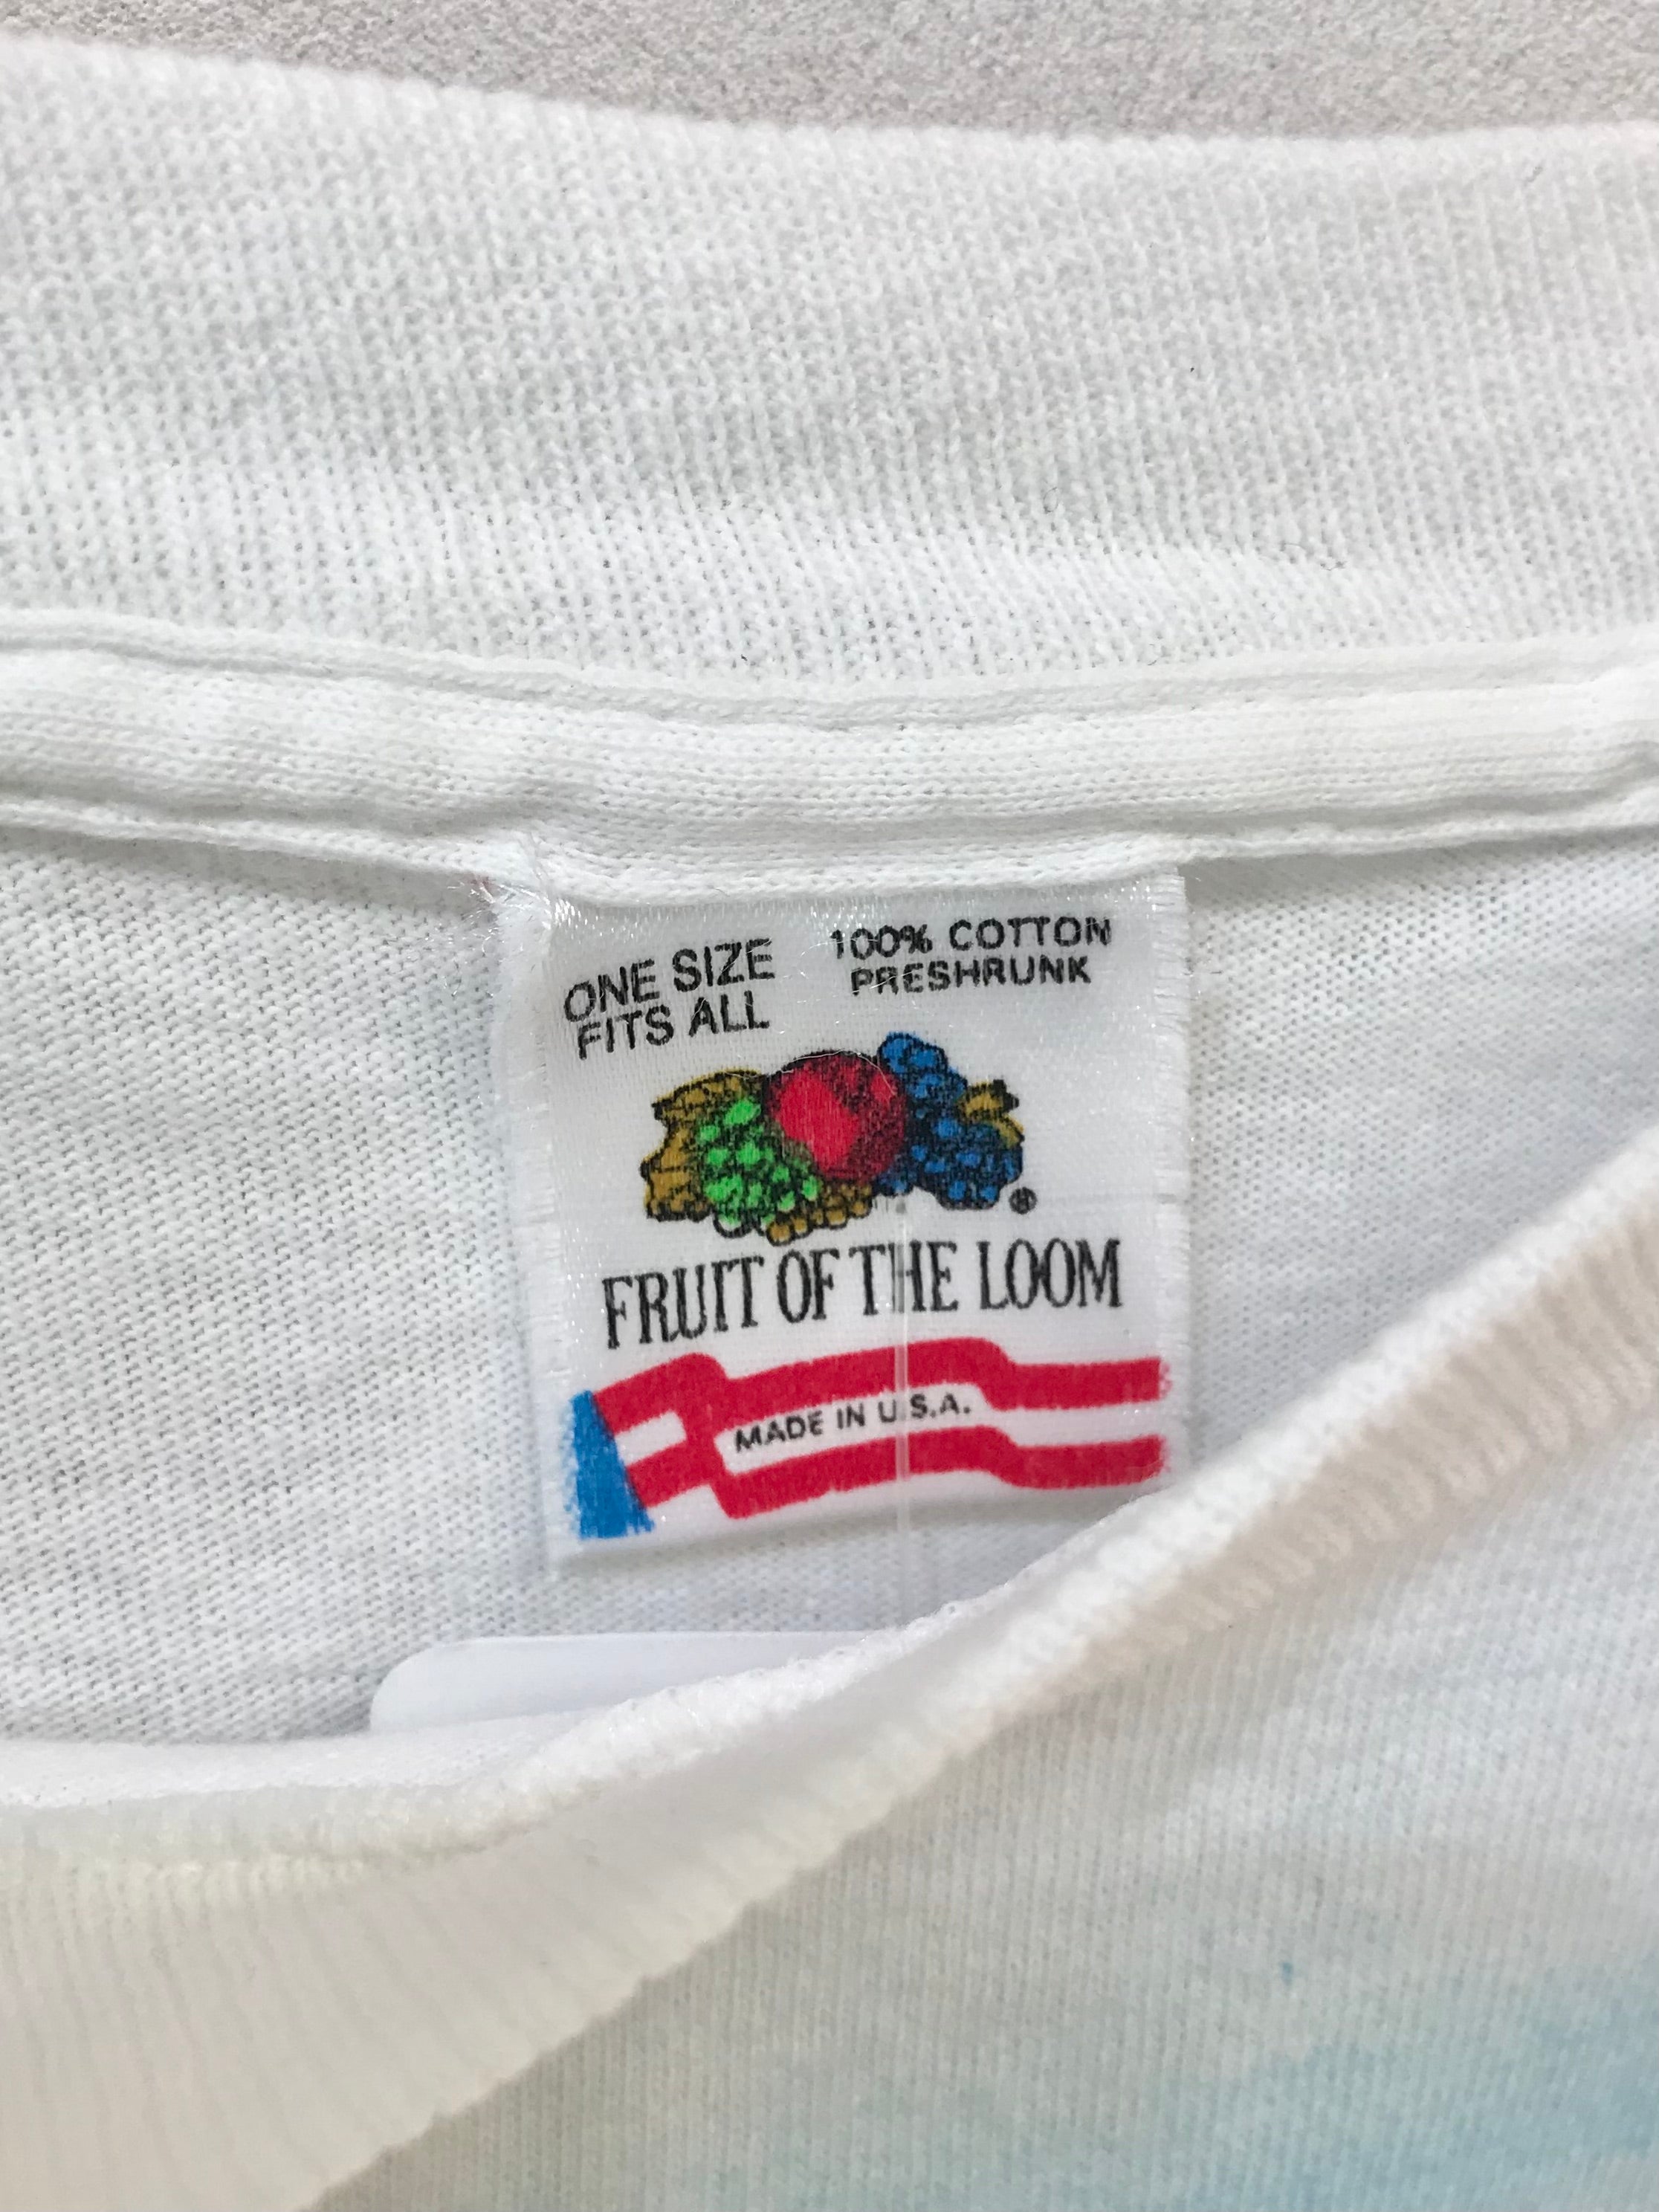 80s VINTAGE USA FRUIT OF THE LOOM